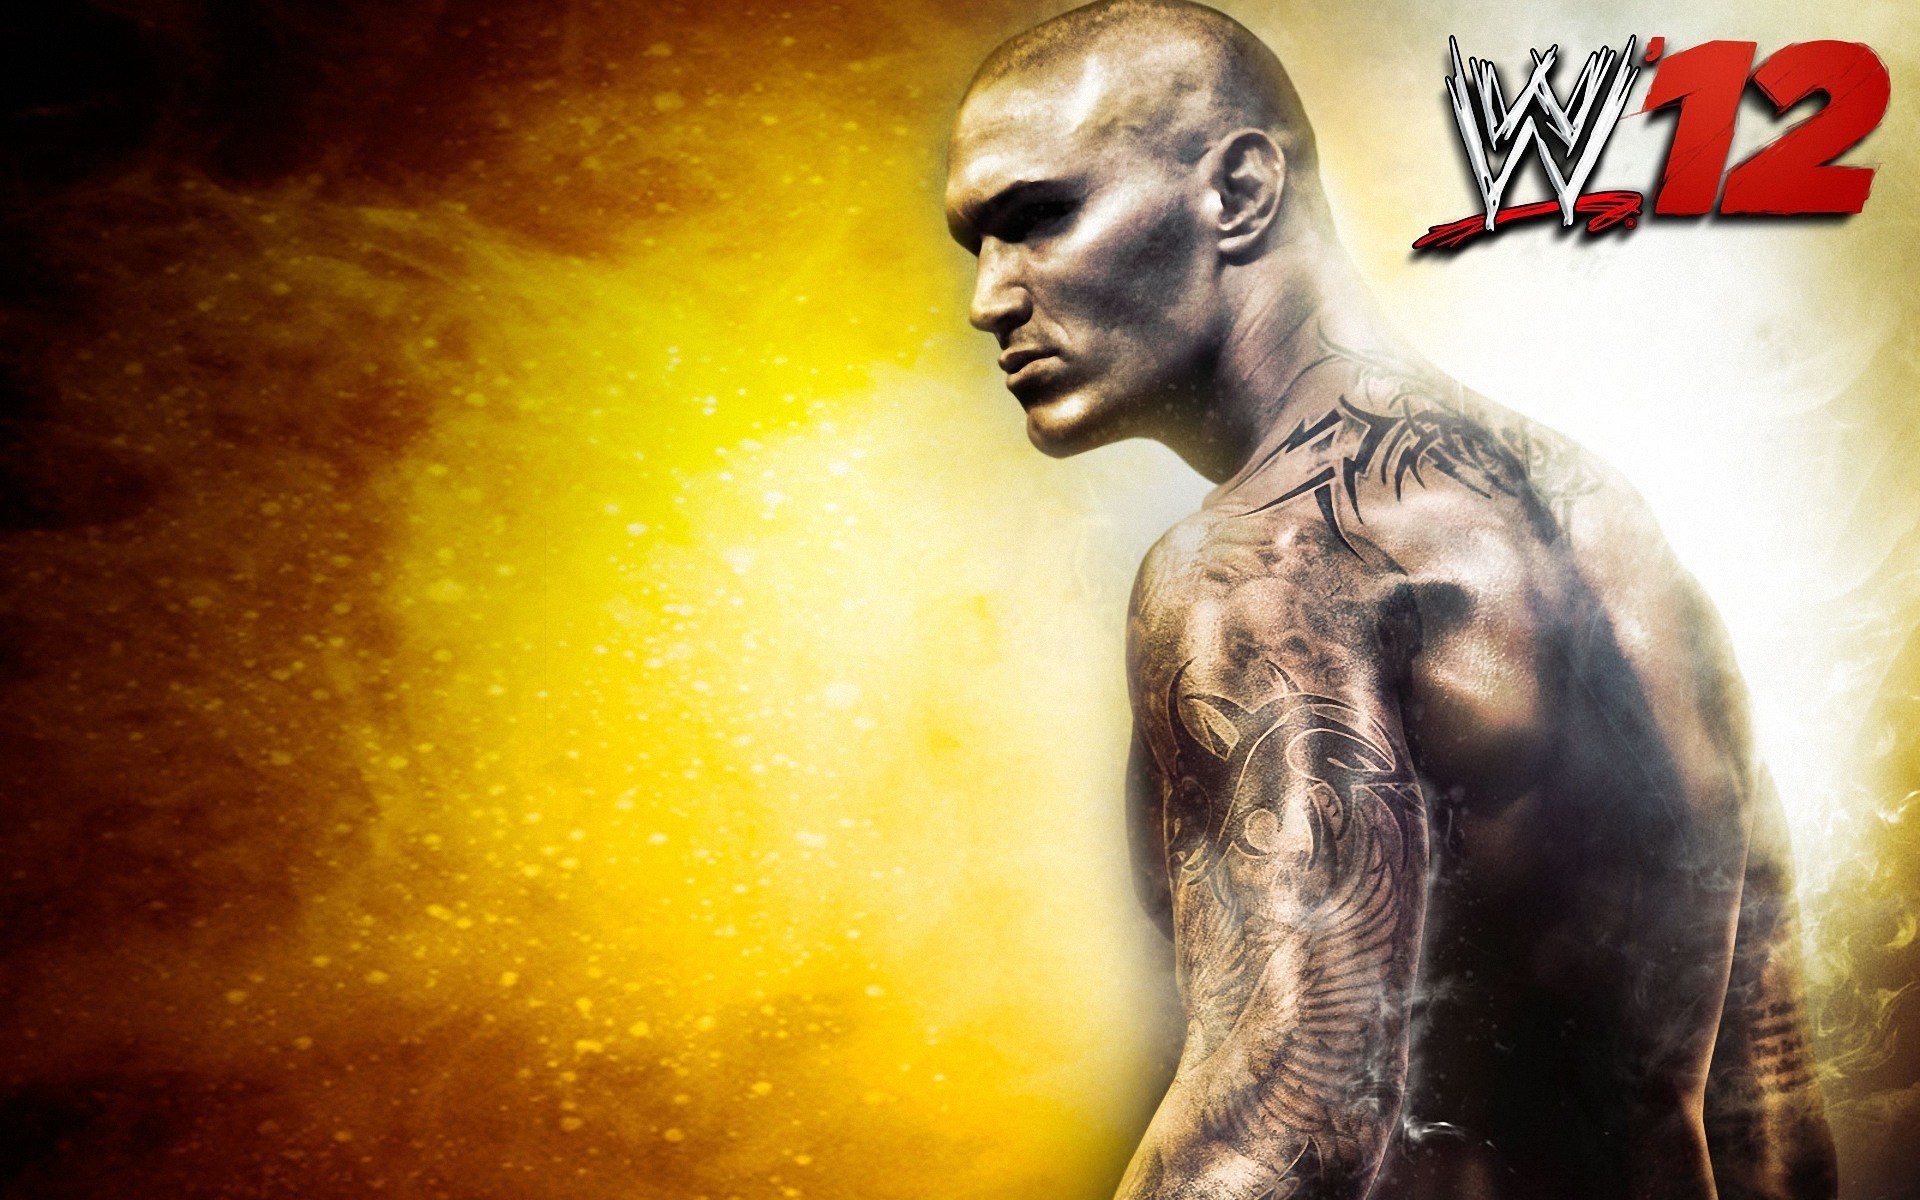 1920x1200 WWE Full HD Background http://wallpapers-and-backgrounds.net/wwe-full-hd-background  | wwe | Pinterest | Hd backgrounds